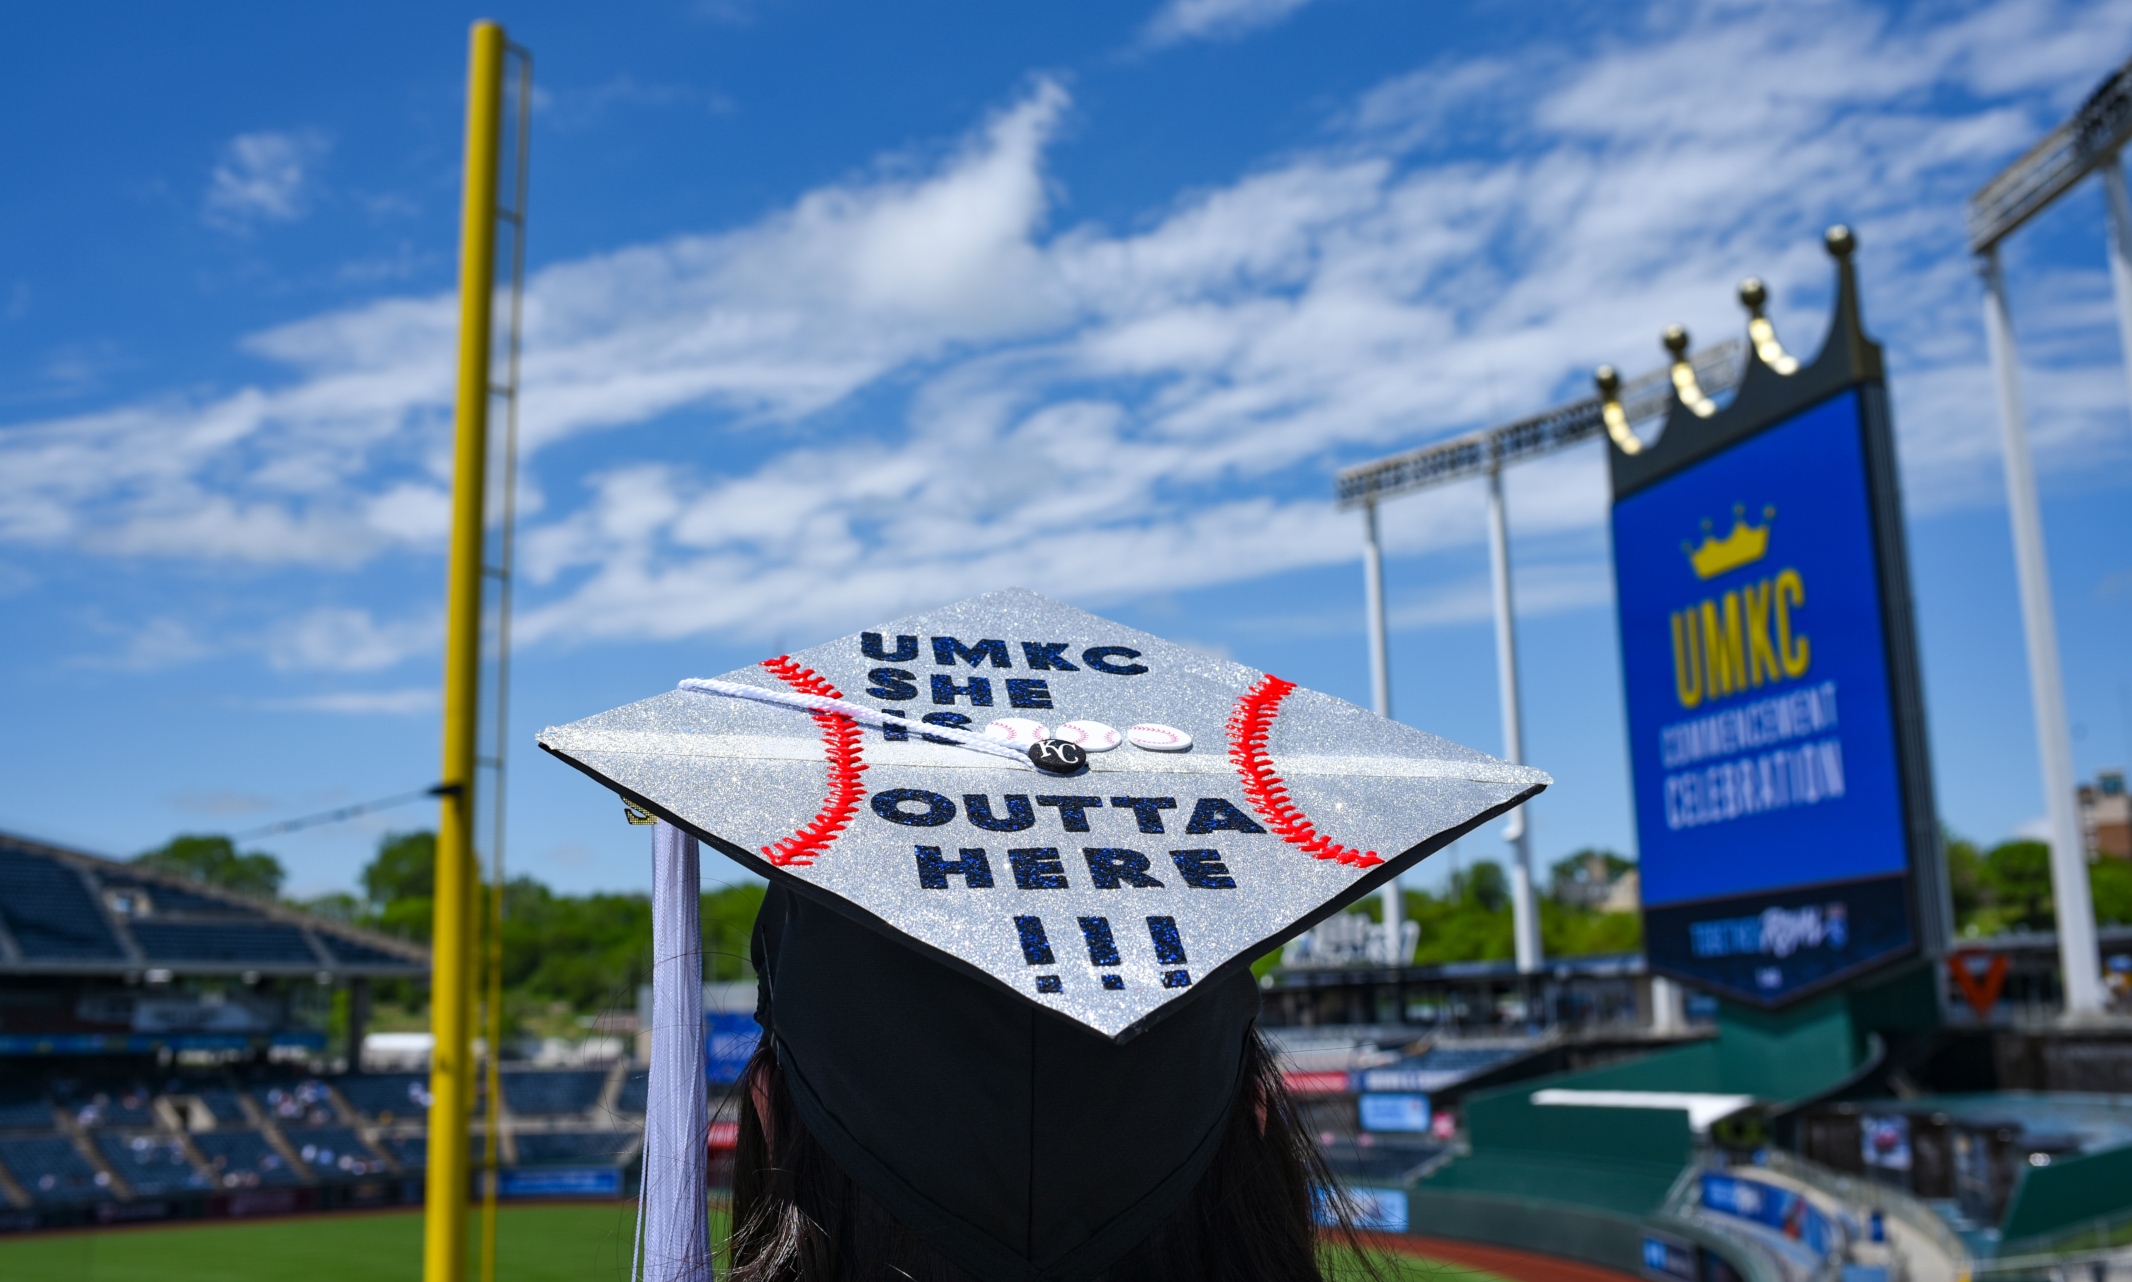 Graduate cap that says "UMKC, she's outta here" with the Royals Crown Vision screen in the background